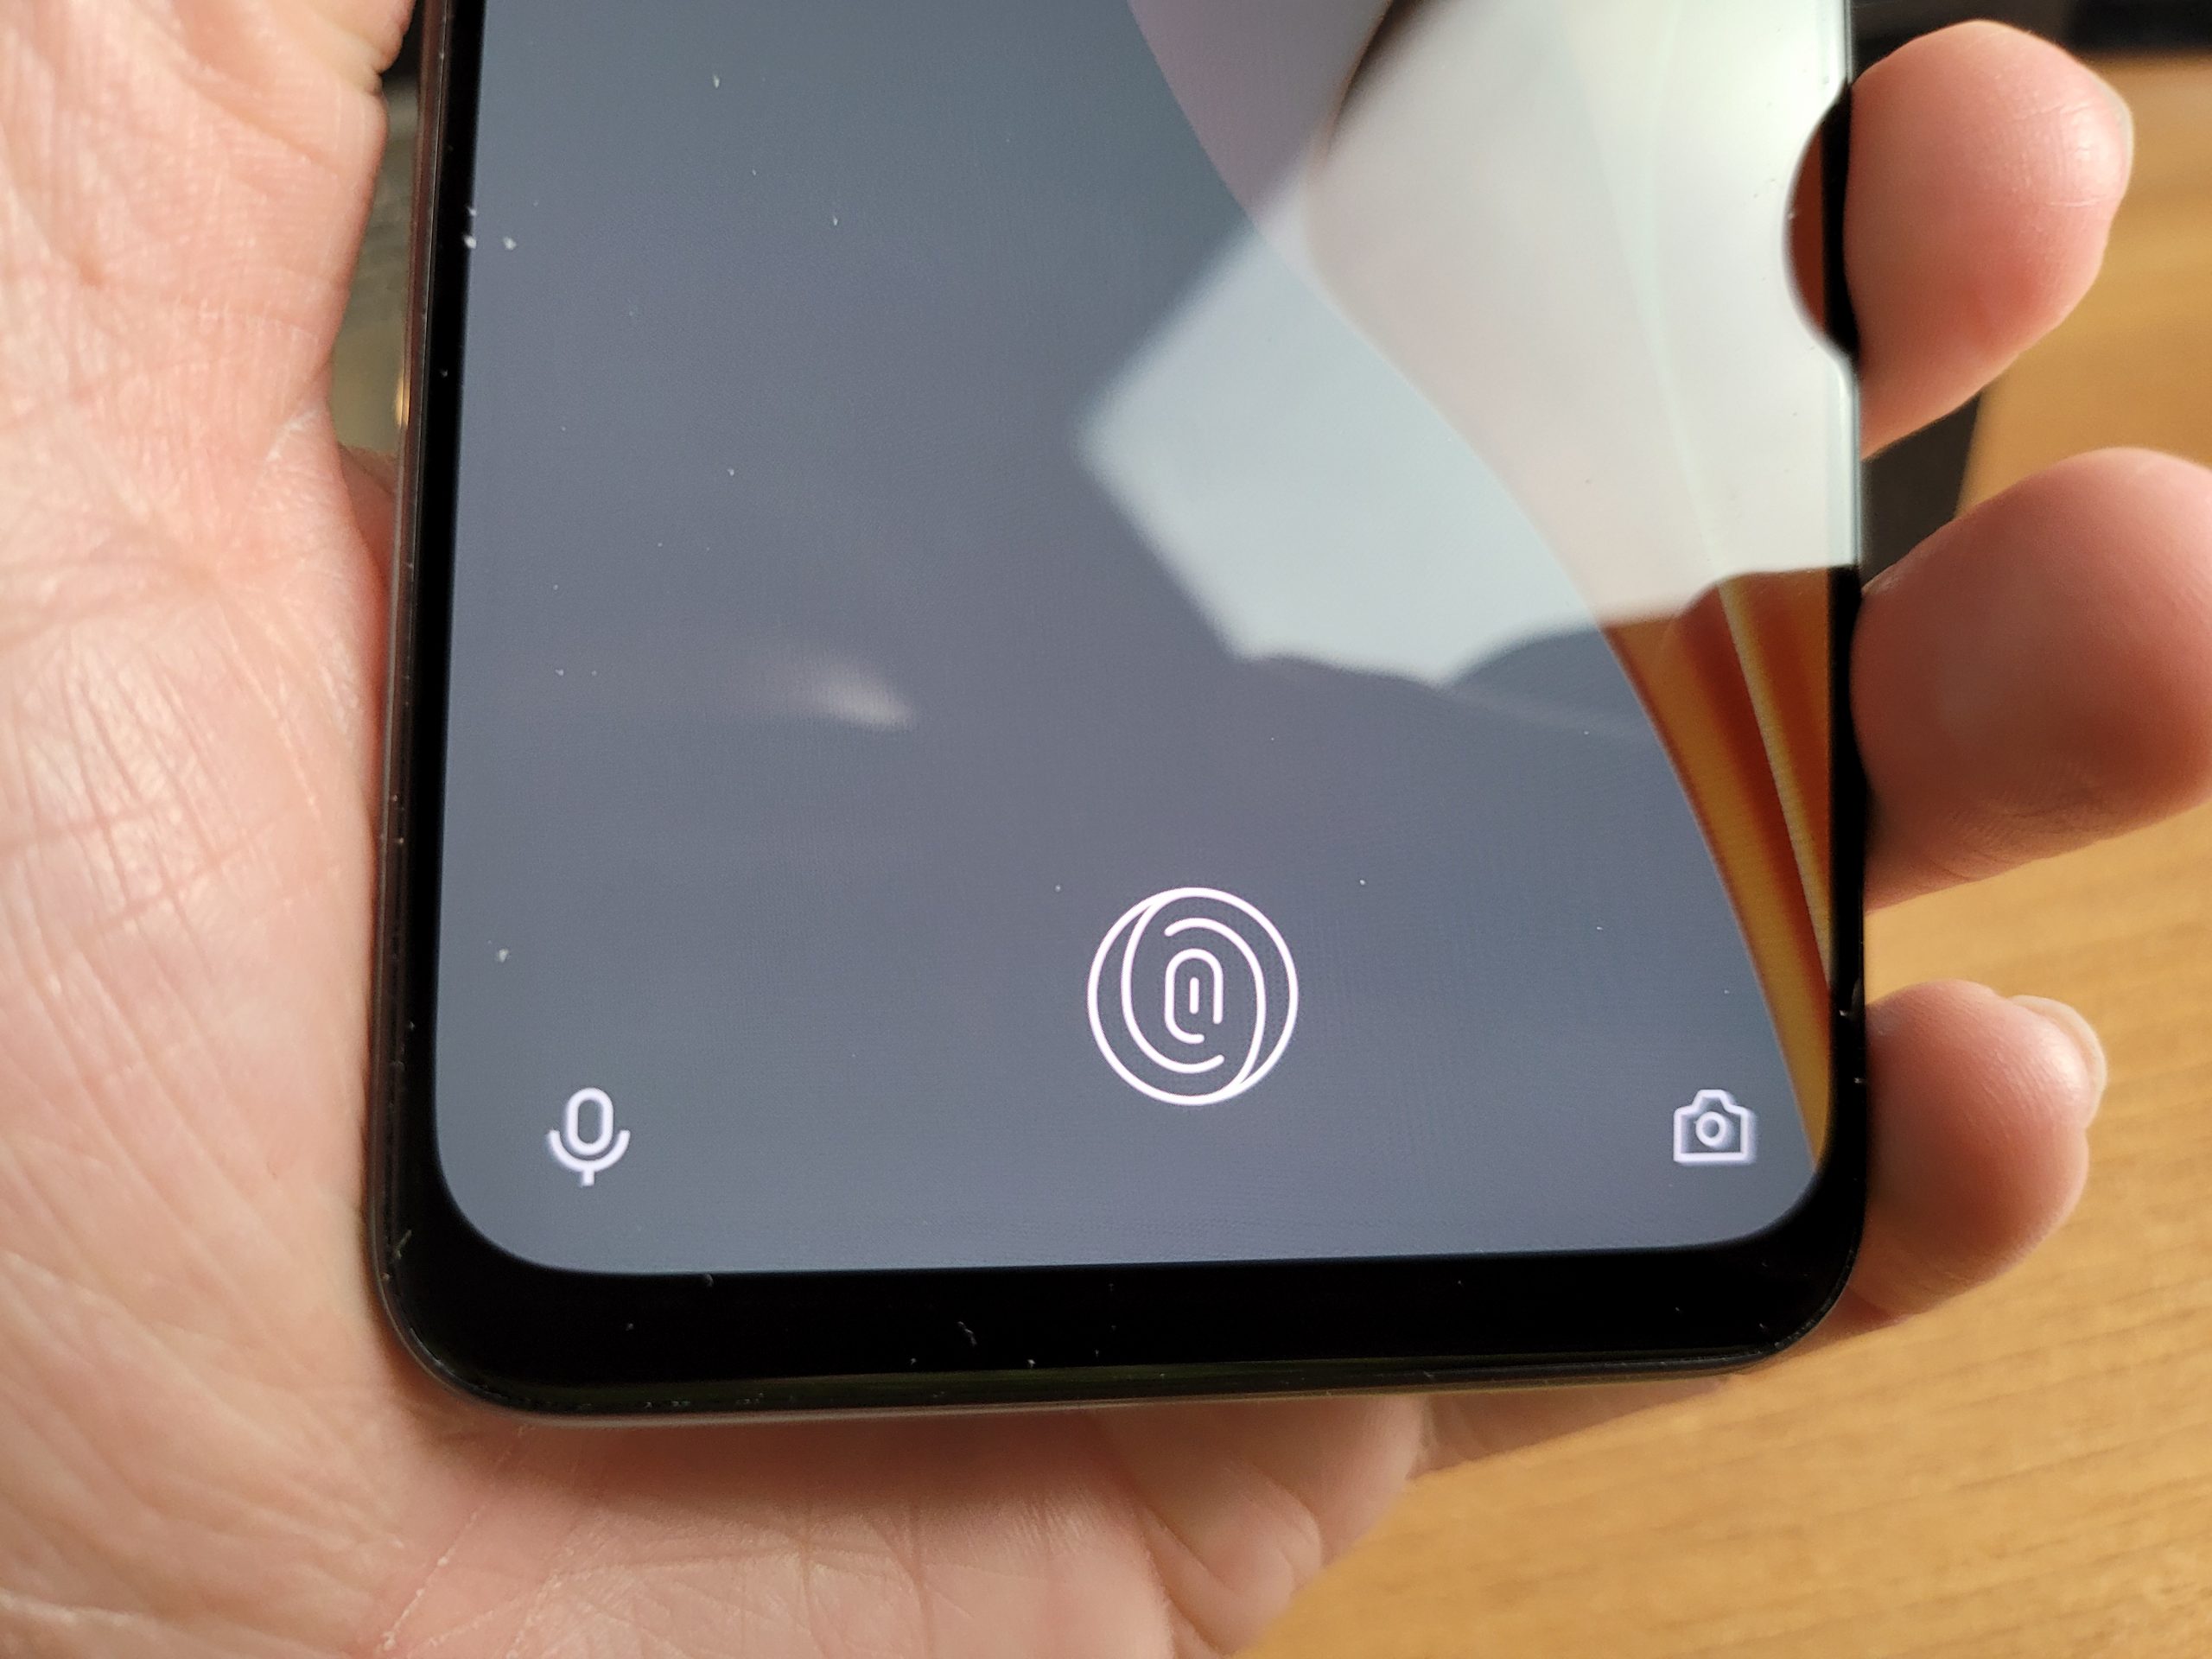 20220513 231252 scaled - OnePlus Nord CE 2 5G recensione